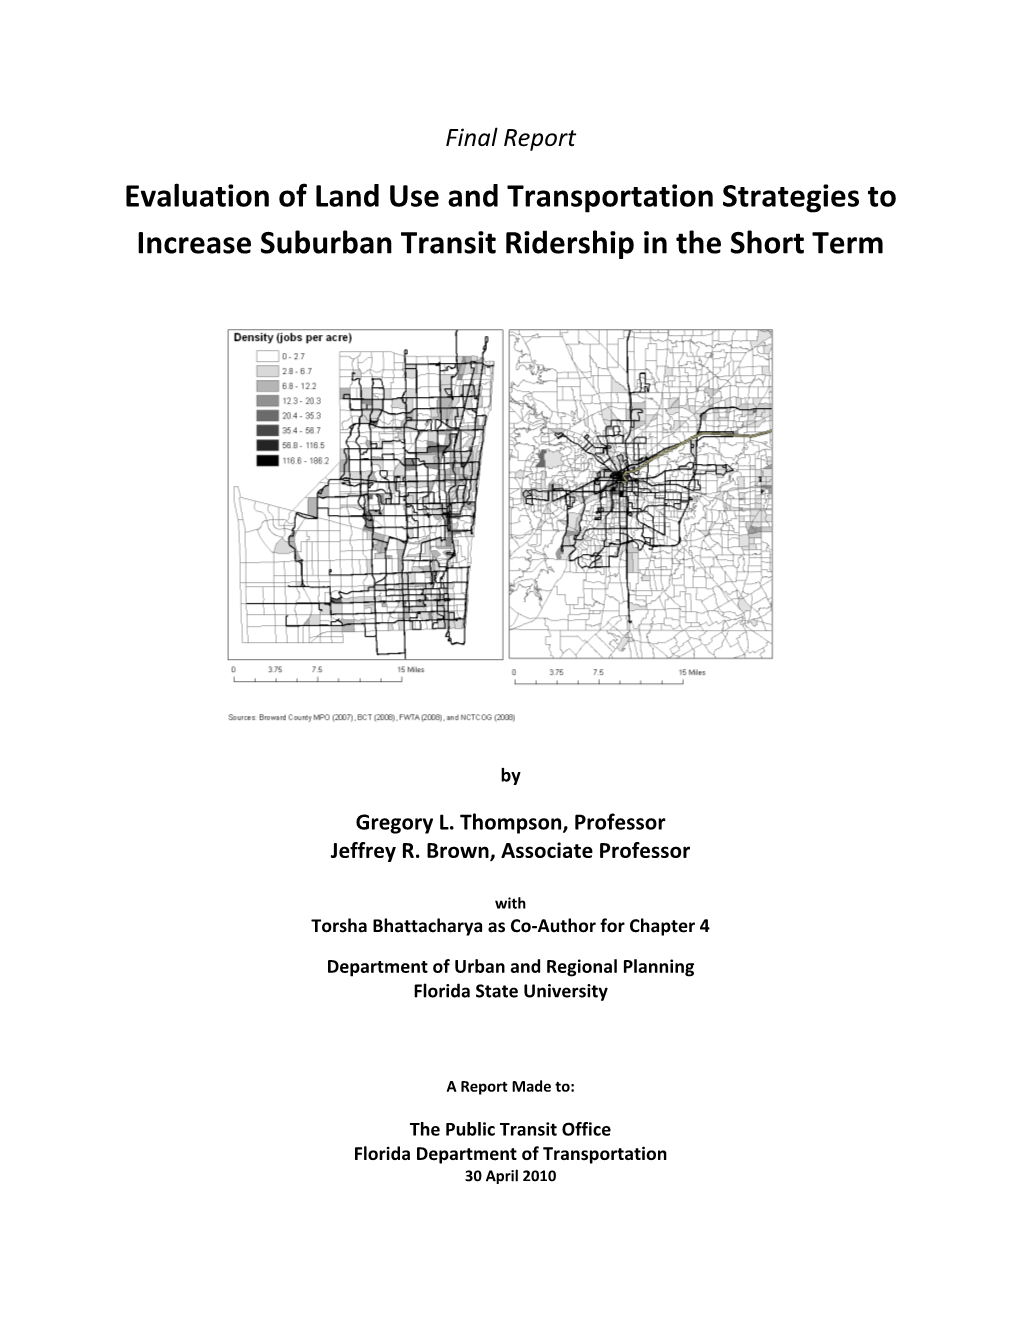 Evaluation of Land Use and Transportation Strategies to Increase Suburban Transit Ridership in the Short Term